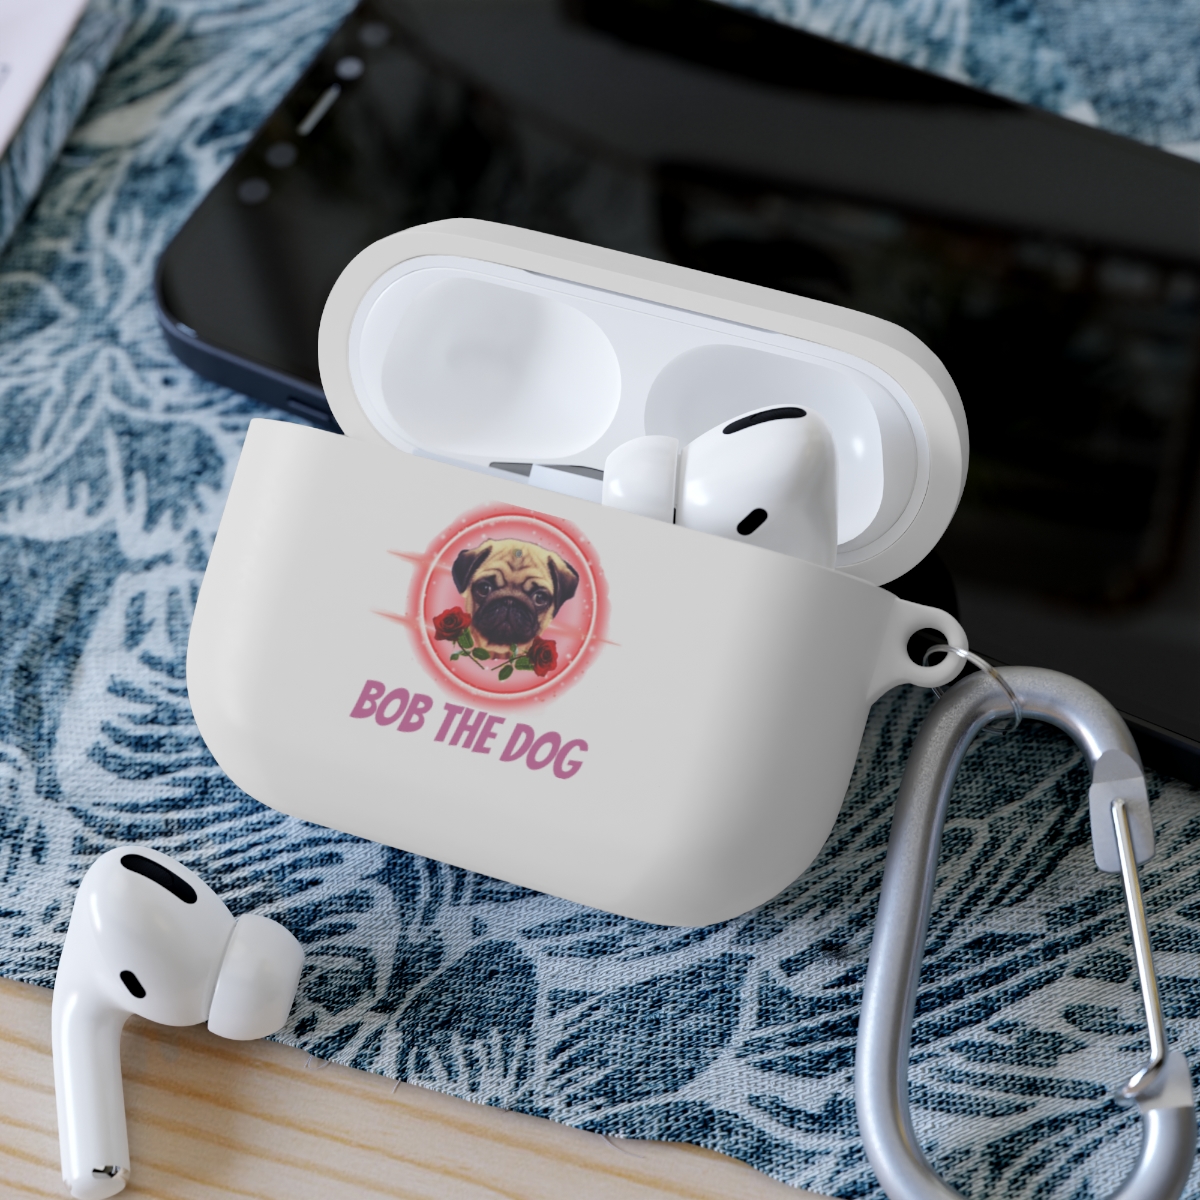 Official Bob the Dog airpods case product thumbnail image